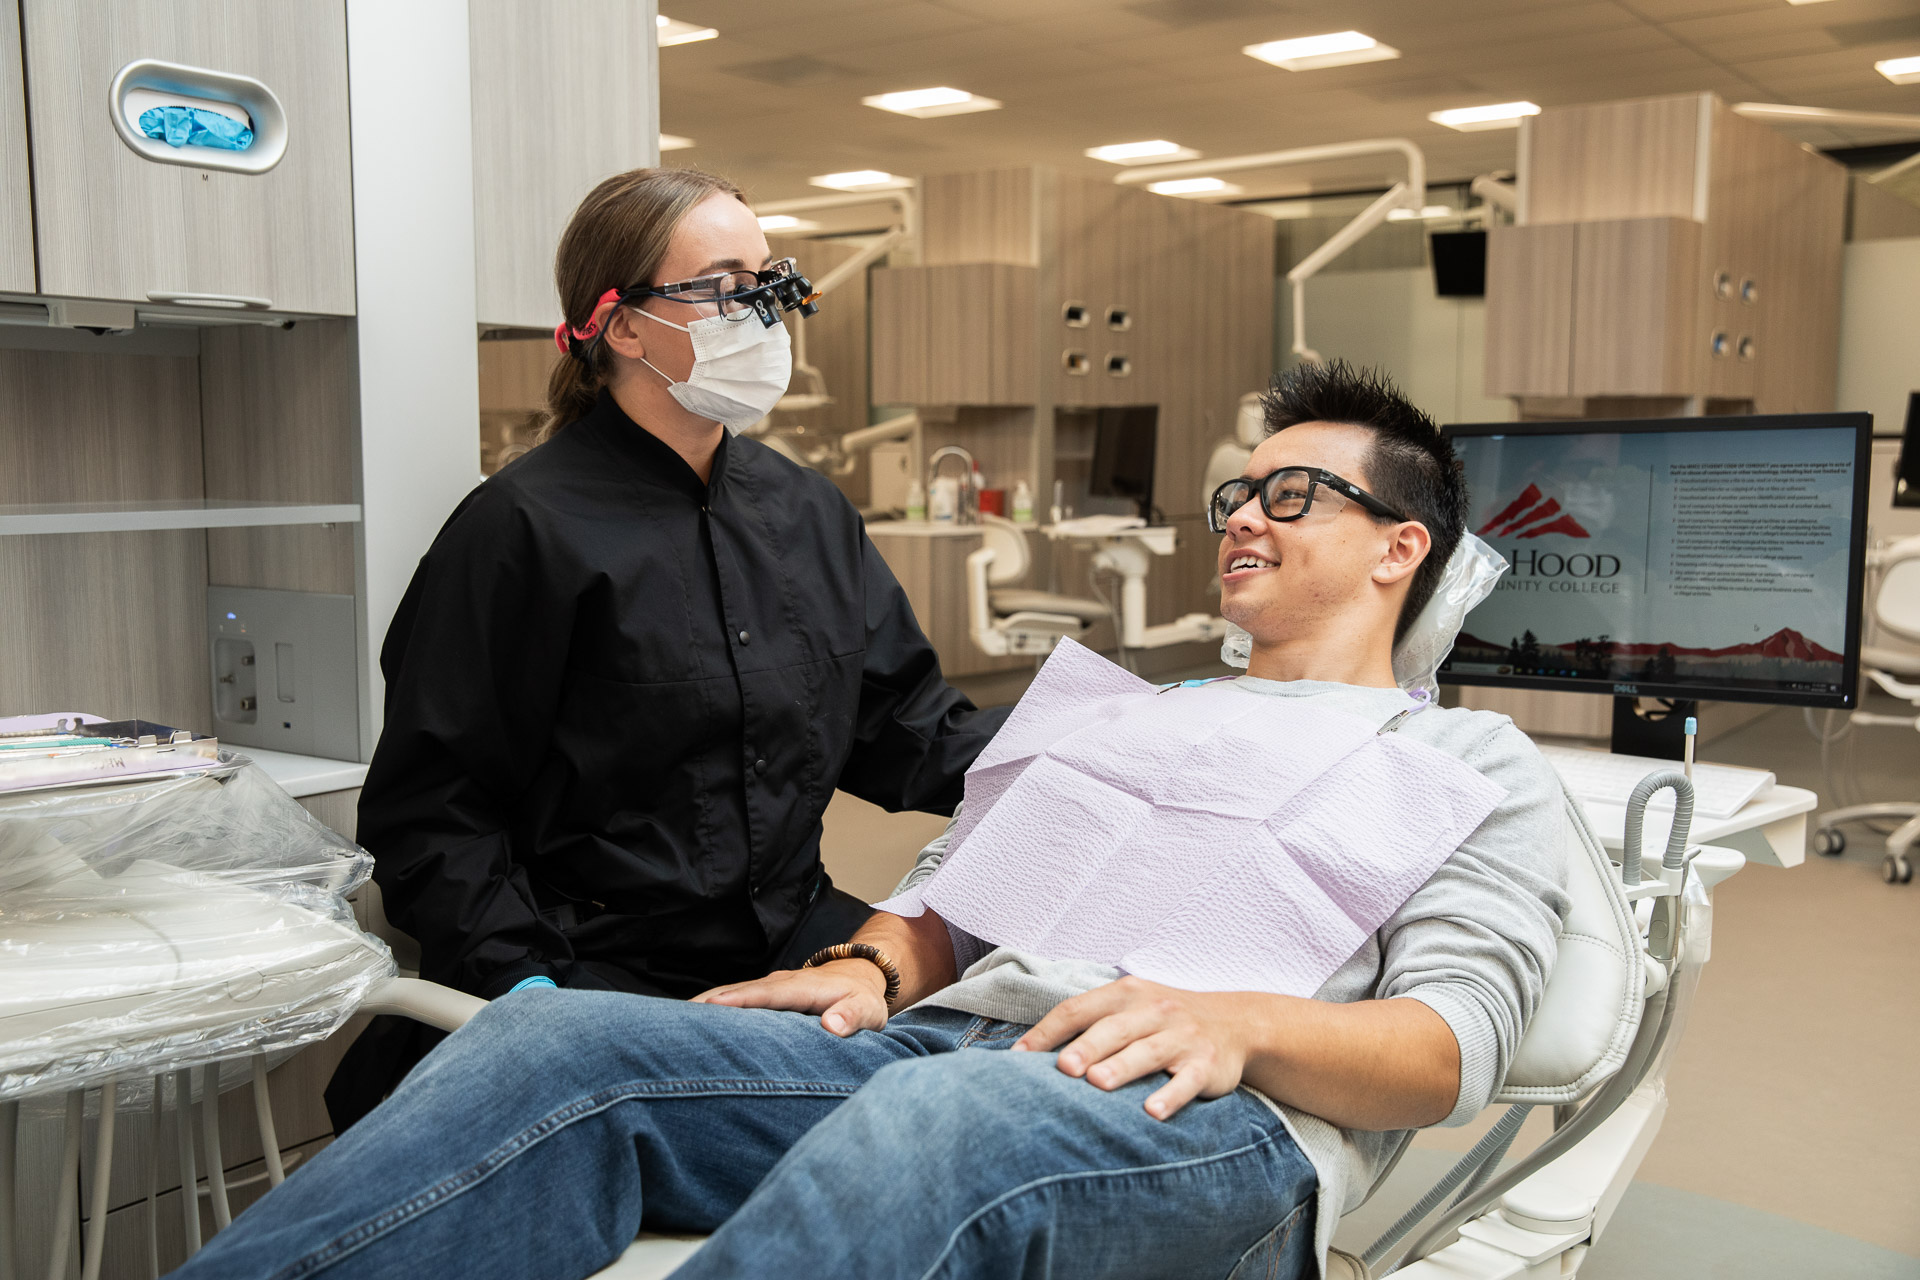 Dental hygiene students with a person in a dentist chair during an exam